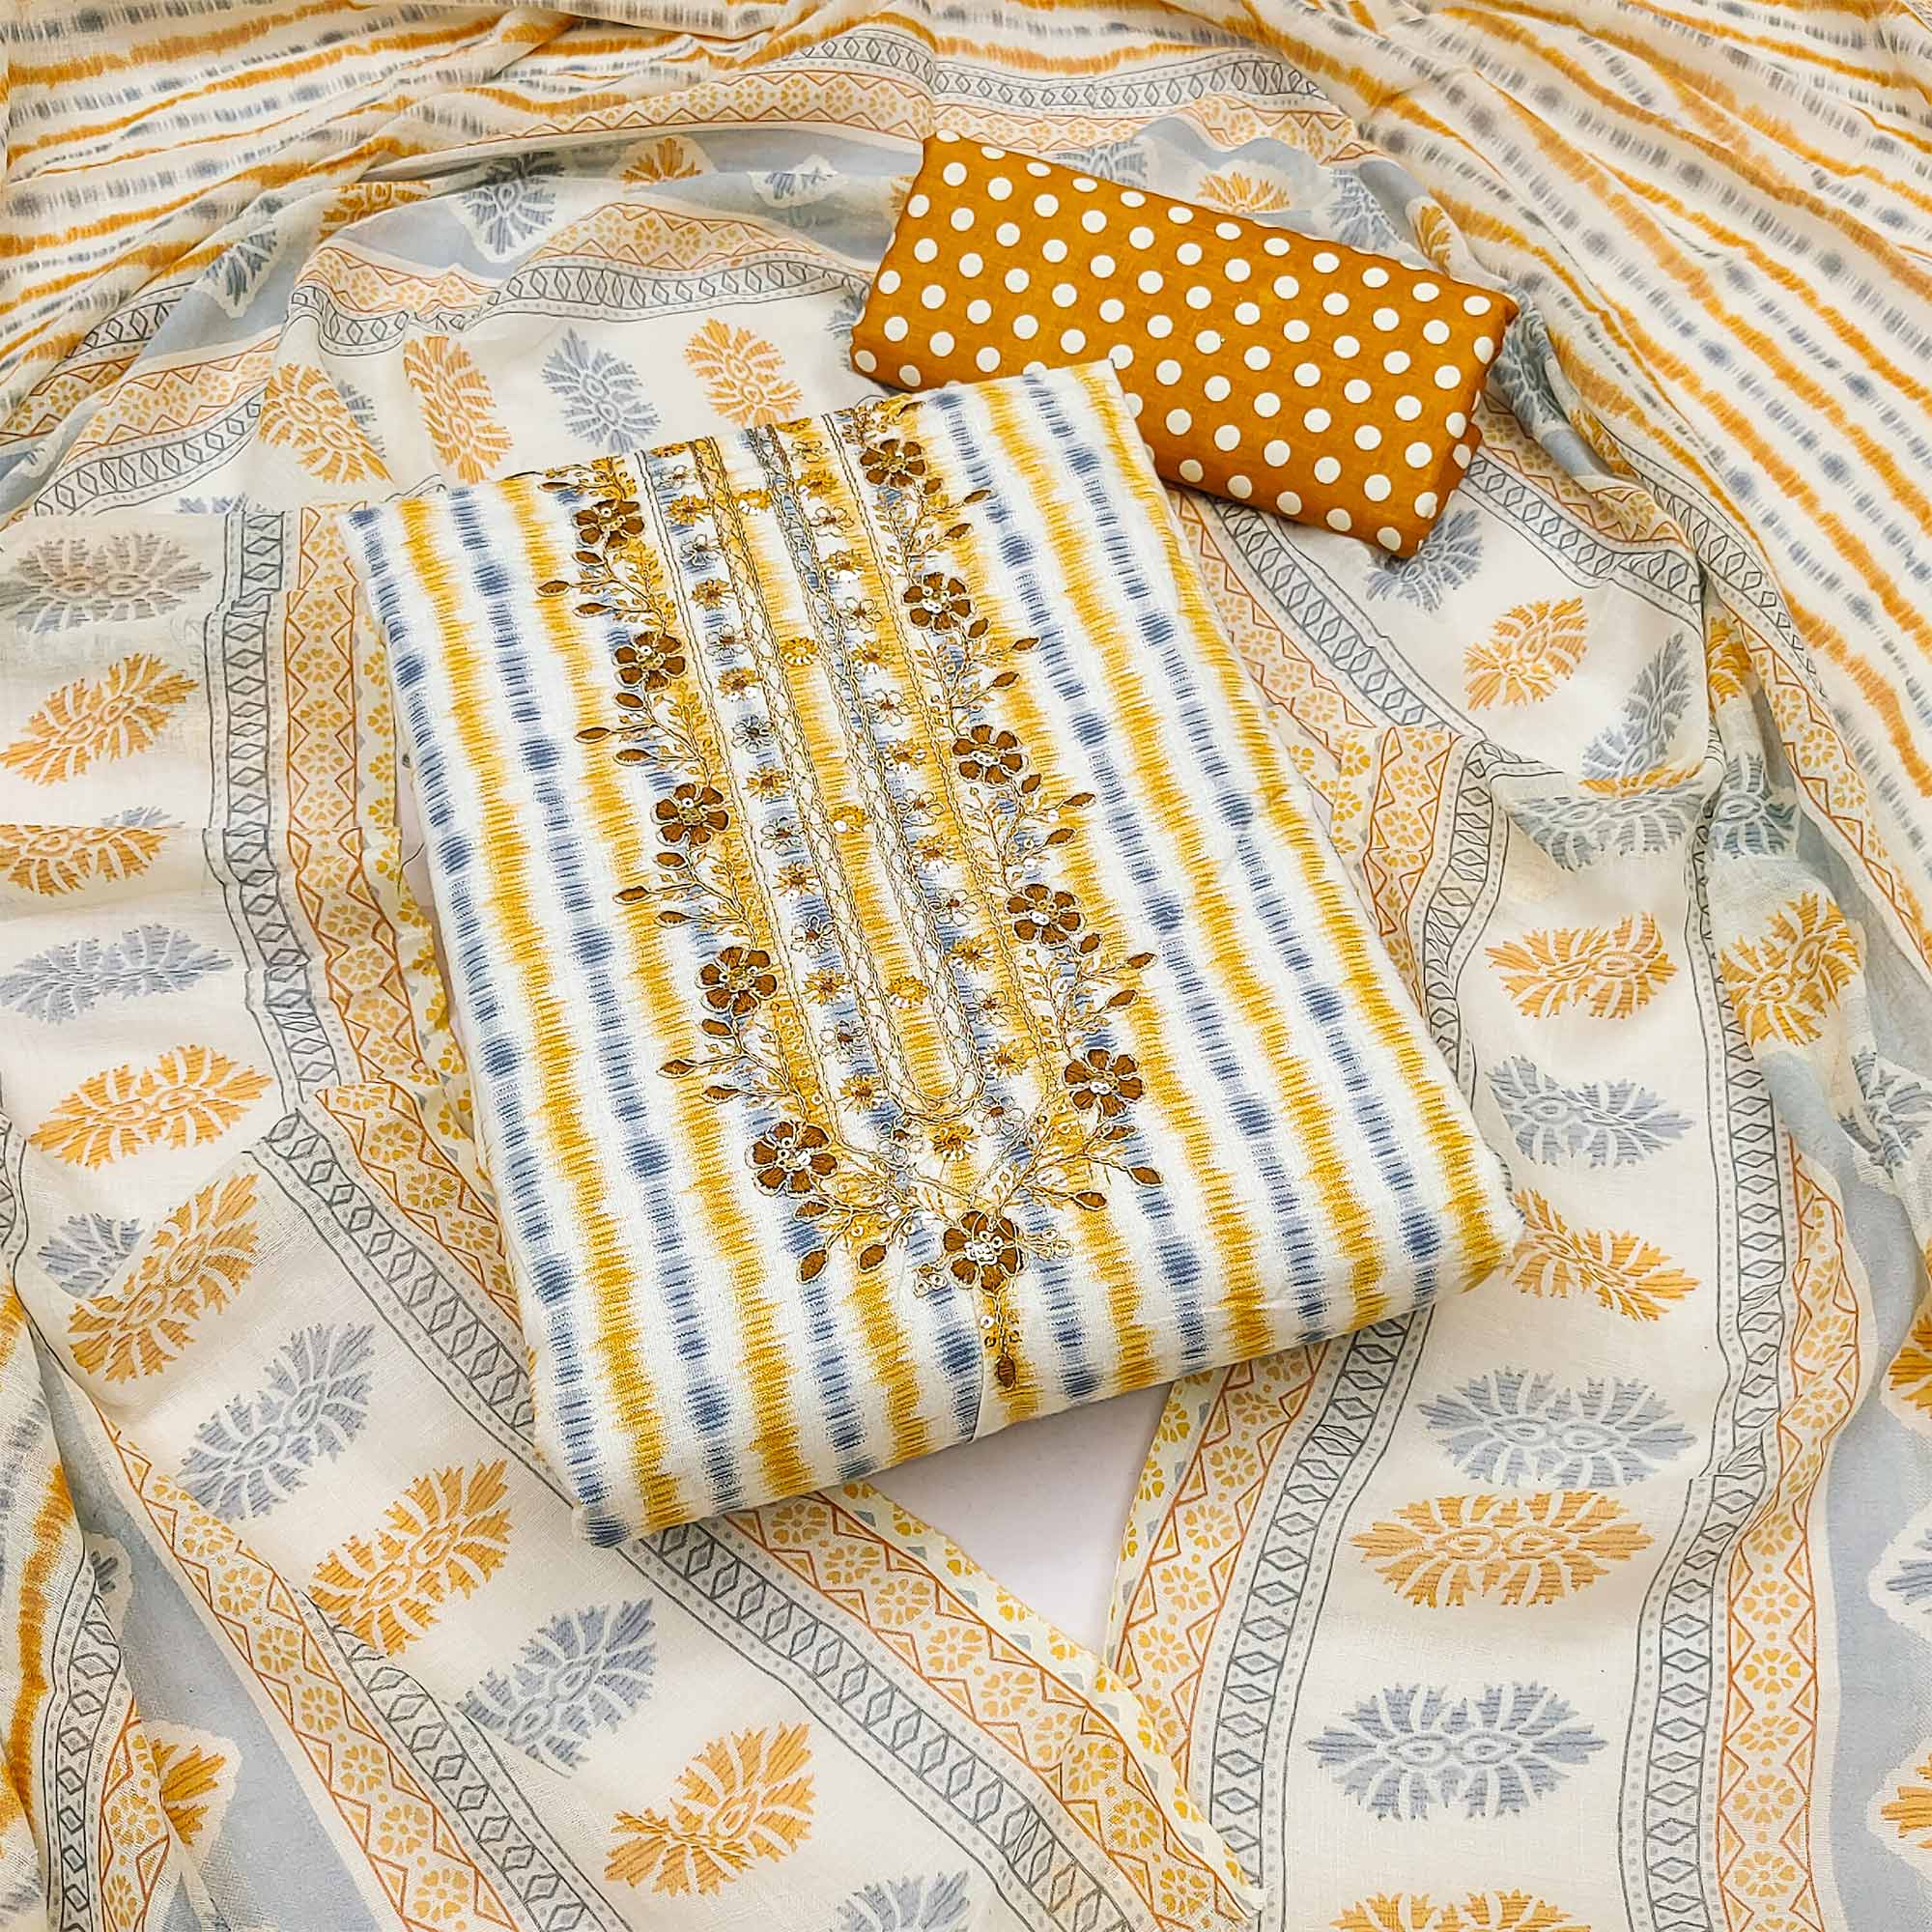 White & Mustard Striped Printed Pure Cotton Dress Material